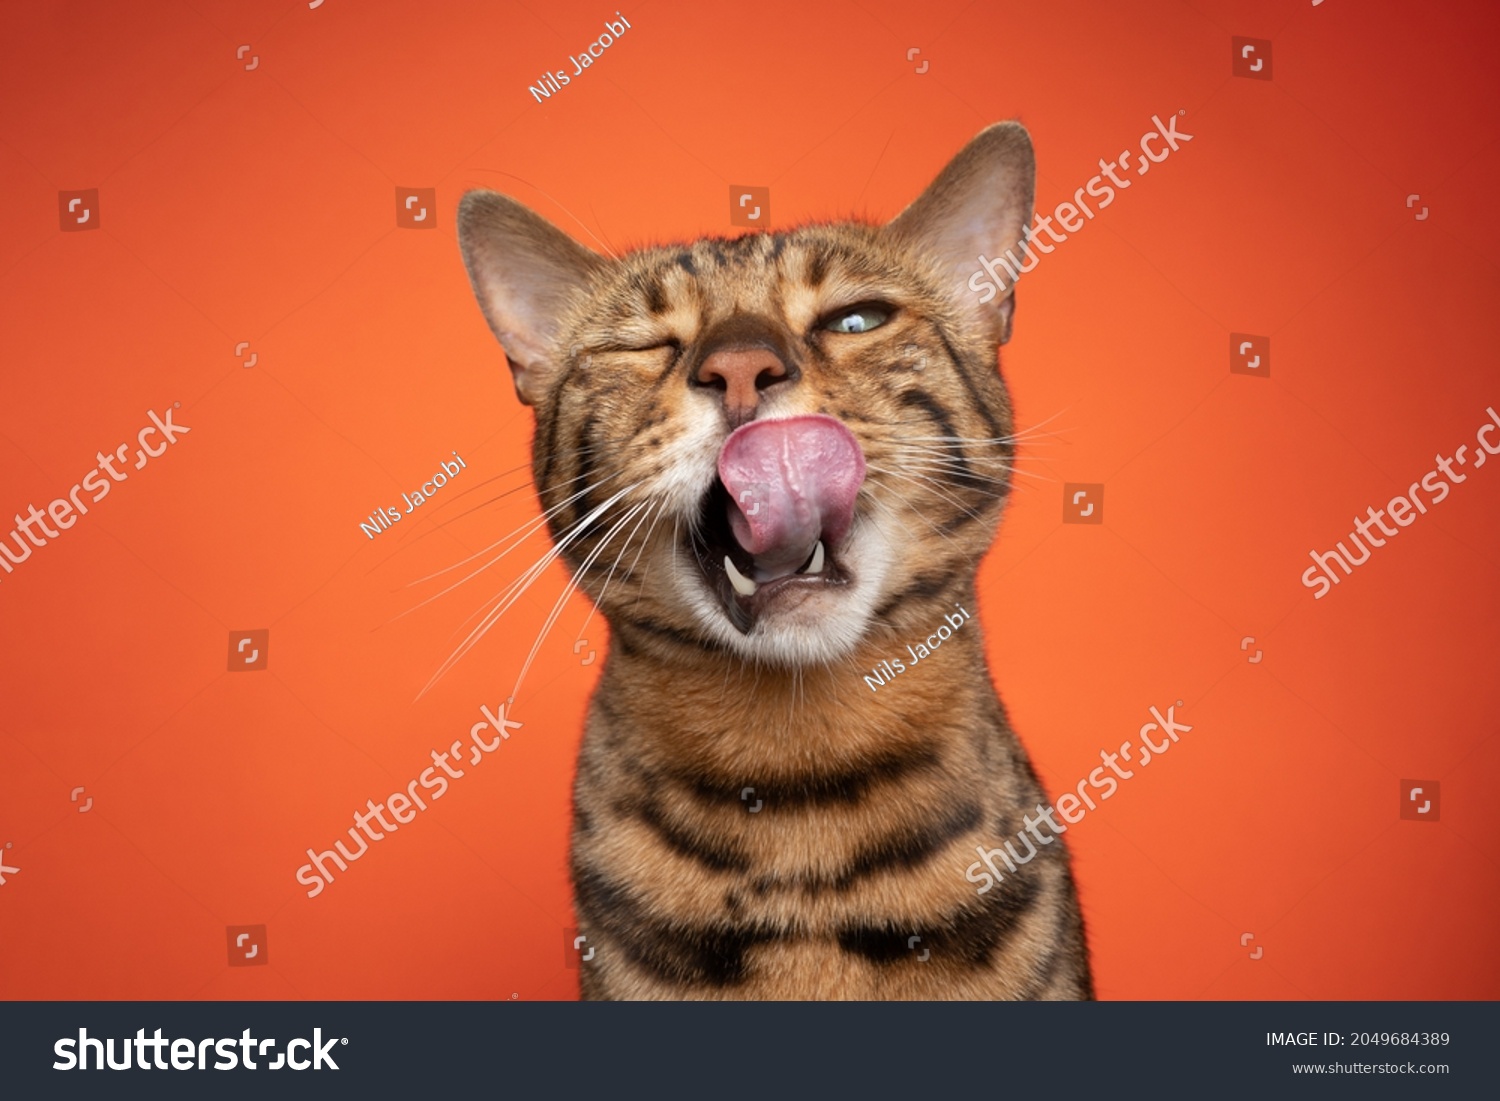 brown bengal cat portrait making funny face licking lips with mouth open looking at camera on orange background #2049684389